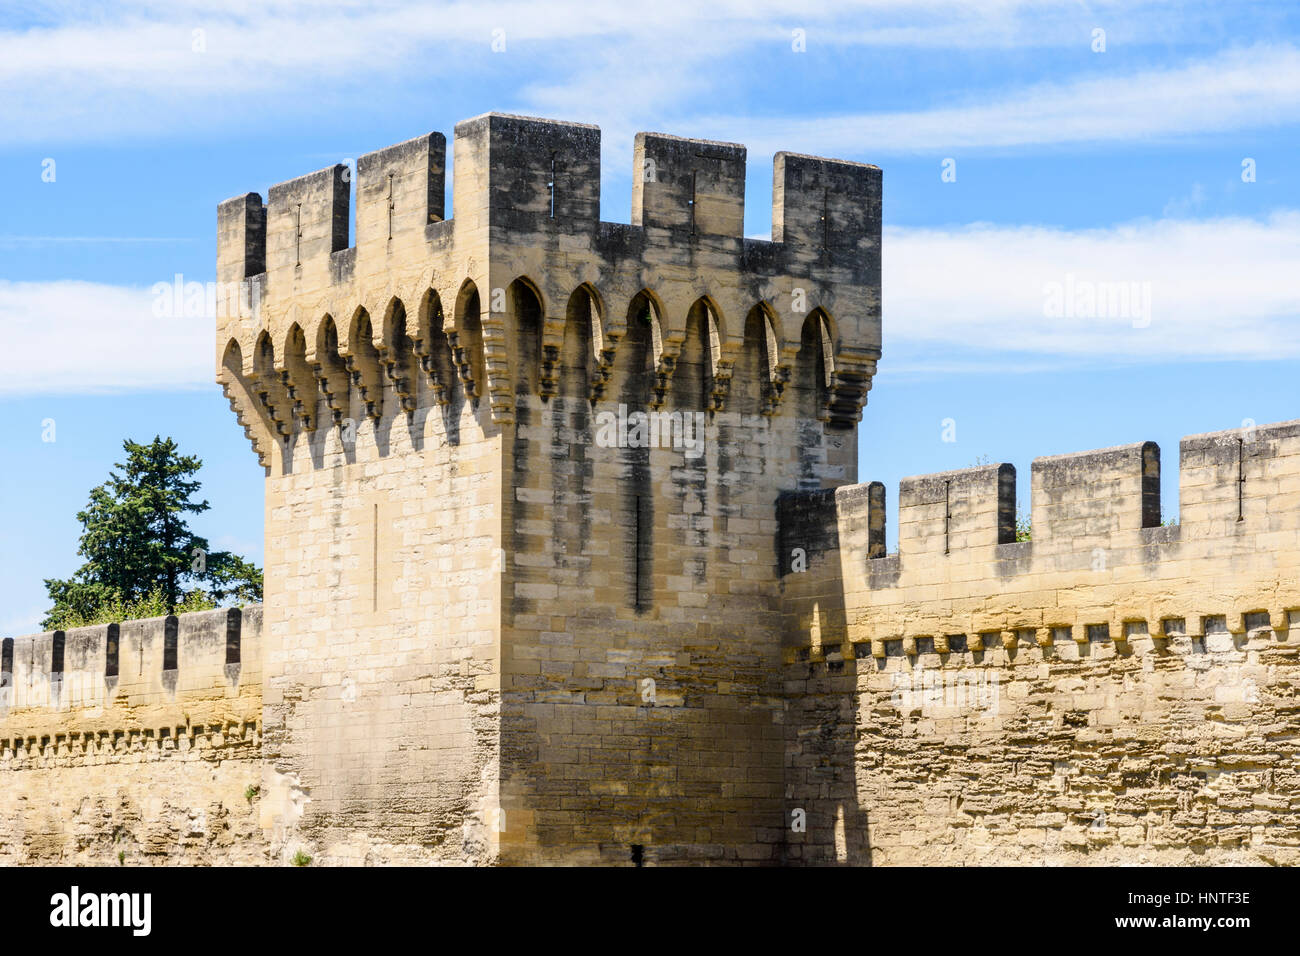 Defensive tower, part of the southern section ramparts of the medieval walled city of Avignon, France Stock Photo